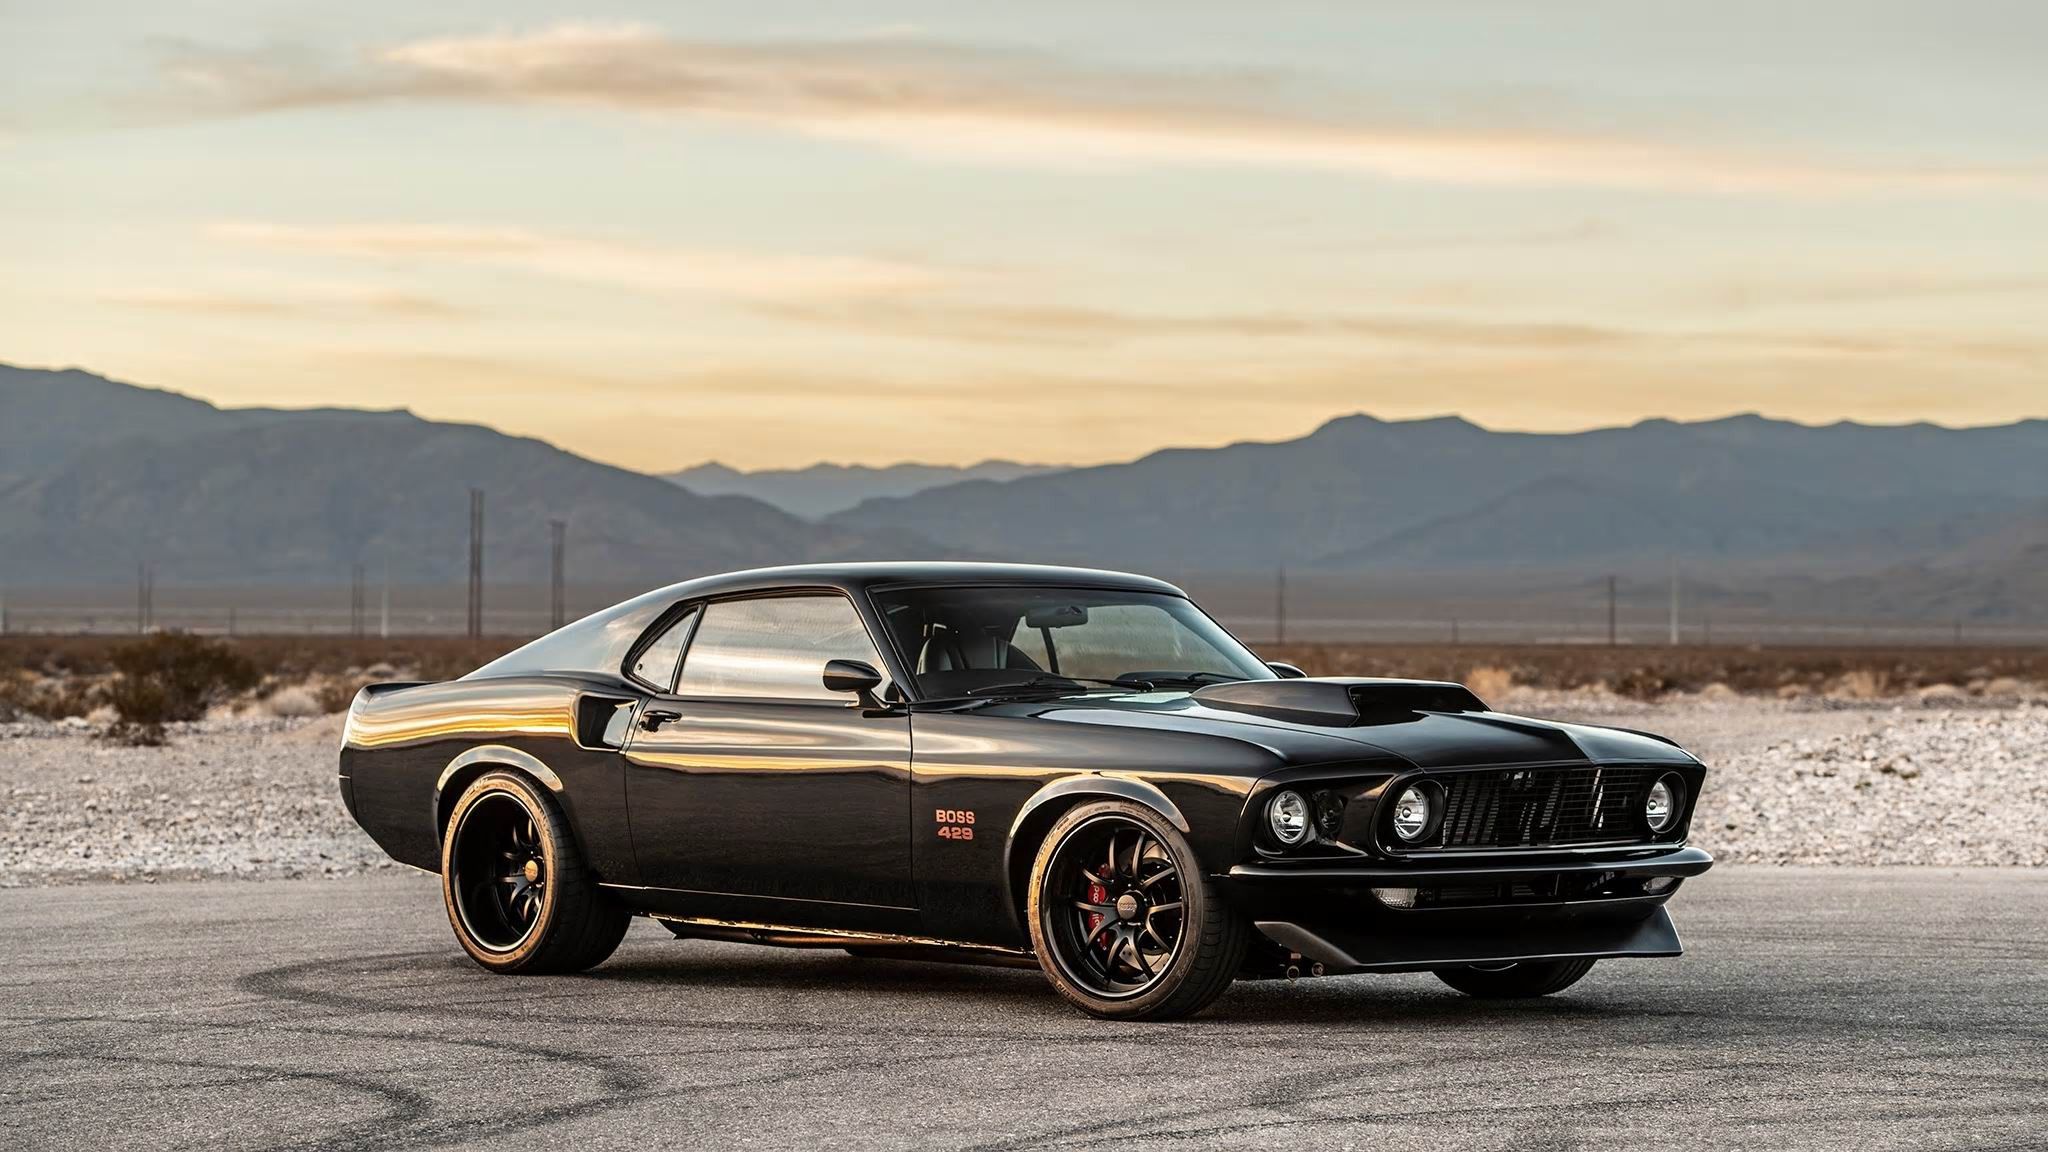 1969 Ringbrothers Ford Mustang Unkl 4K 2 Wallpaper  HD Car Wallpapers  13625